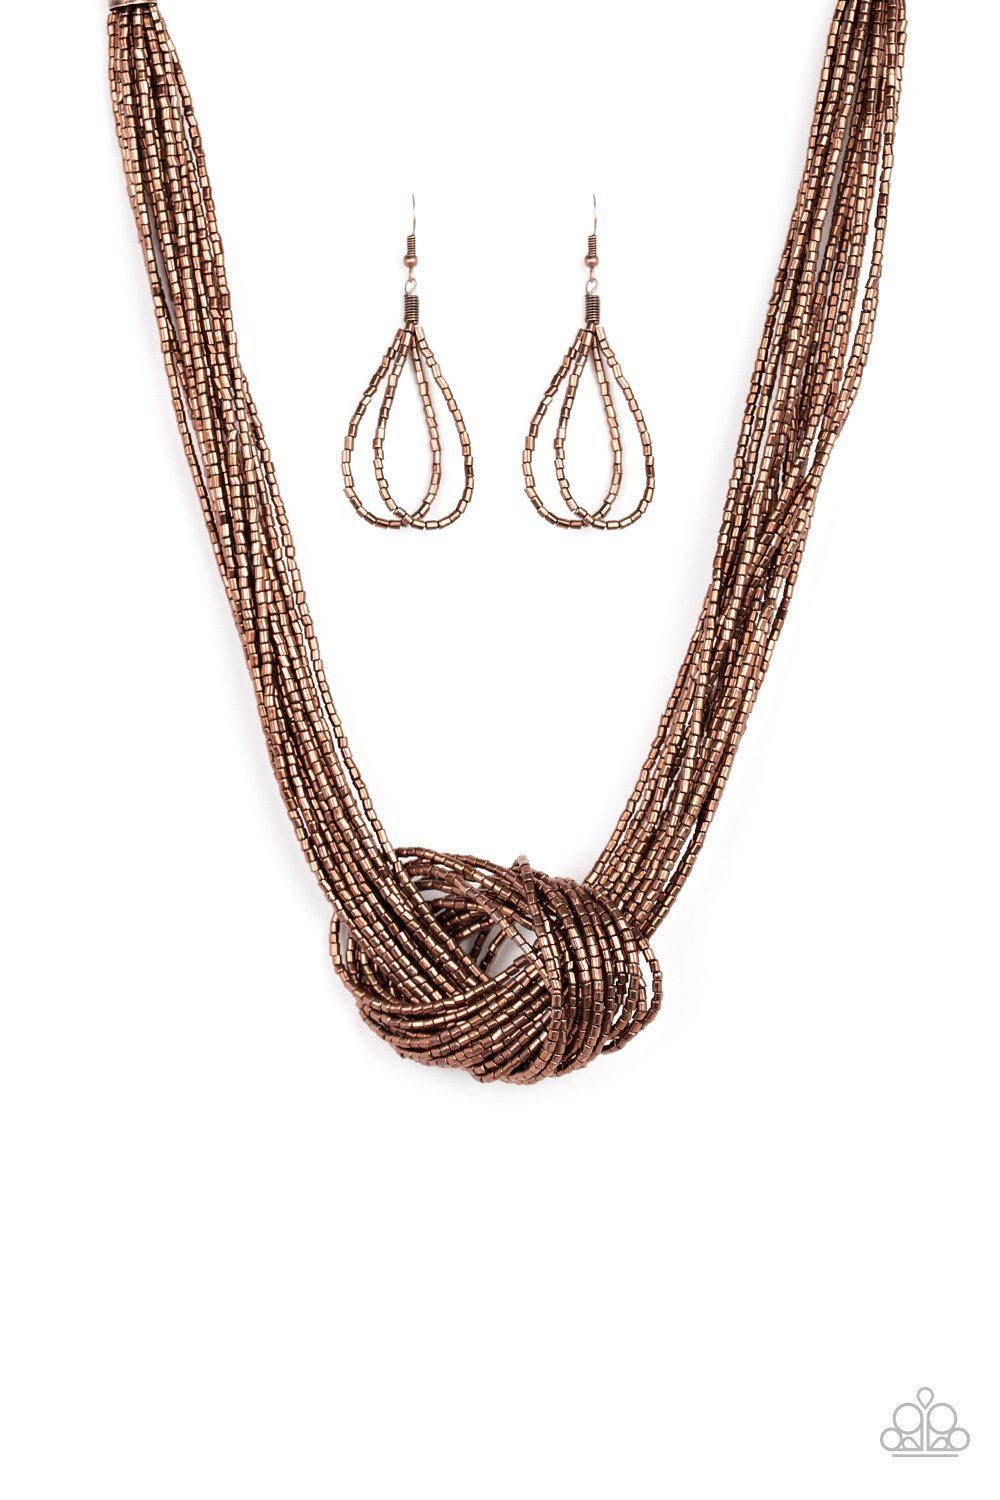 Knotted Knockout Copper Seed Bead Necklace - Paparazzi Accessories-CarasShop.com - $5 Jewelry by Cara Jewels